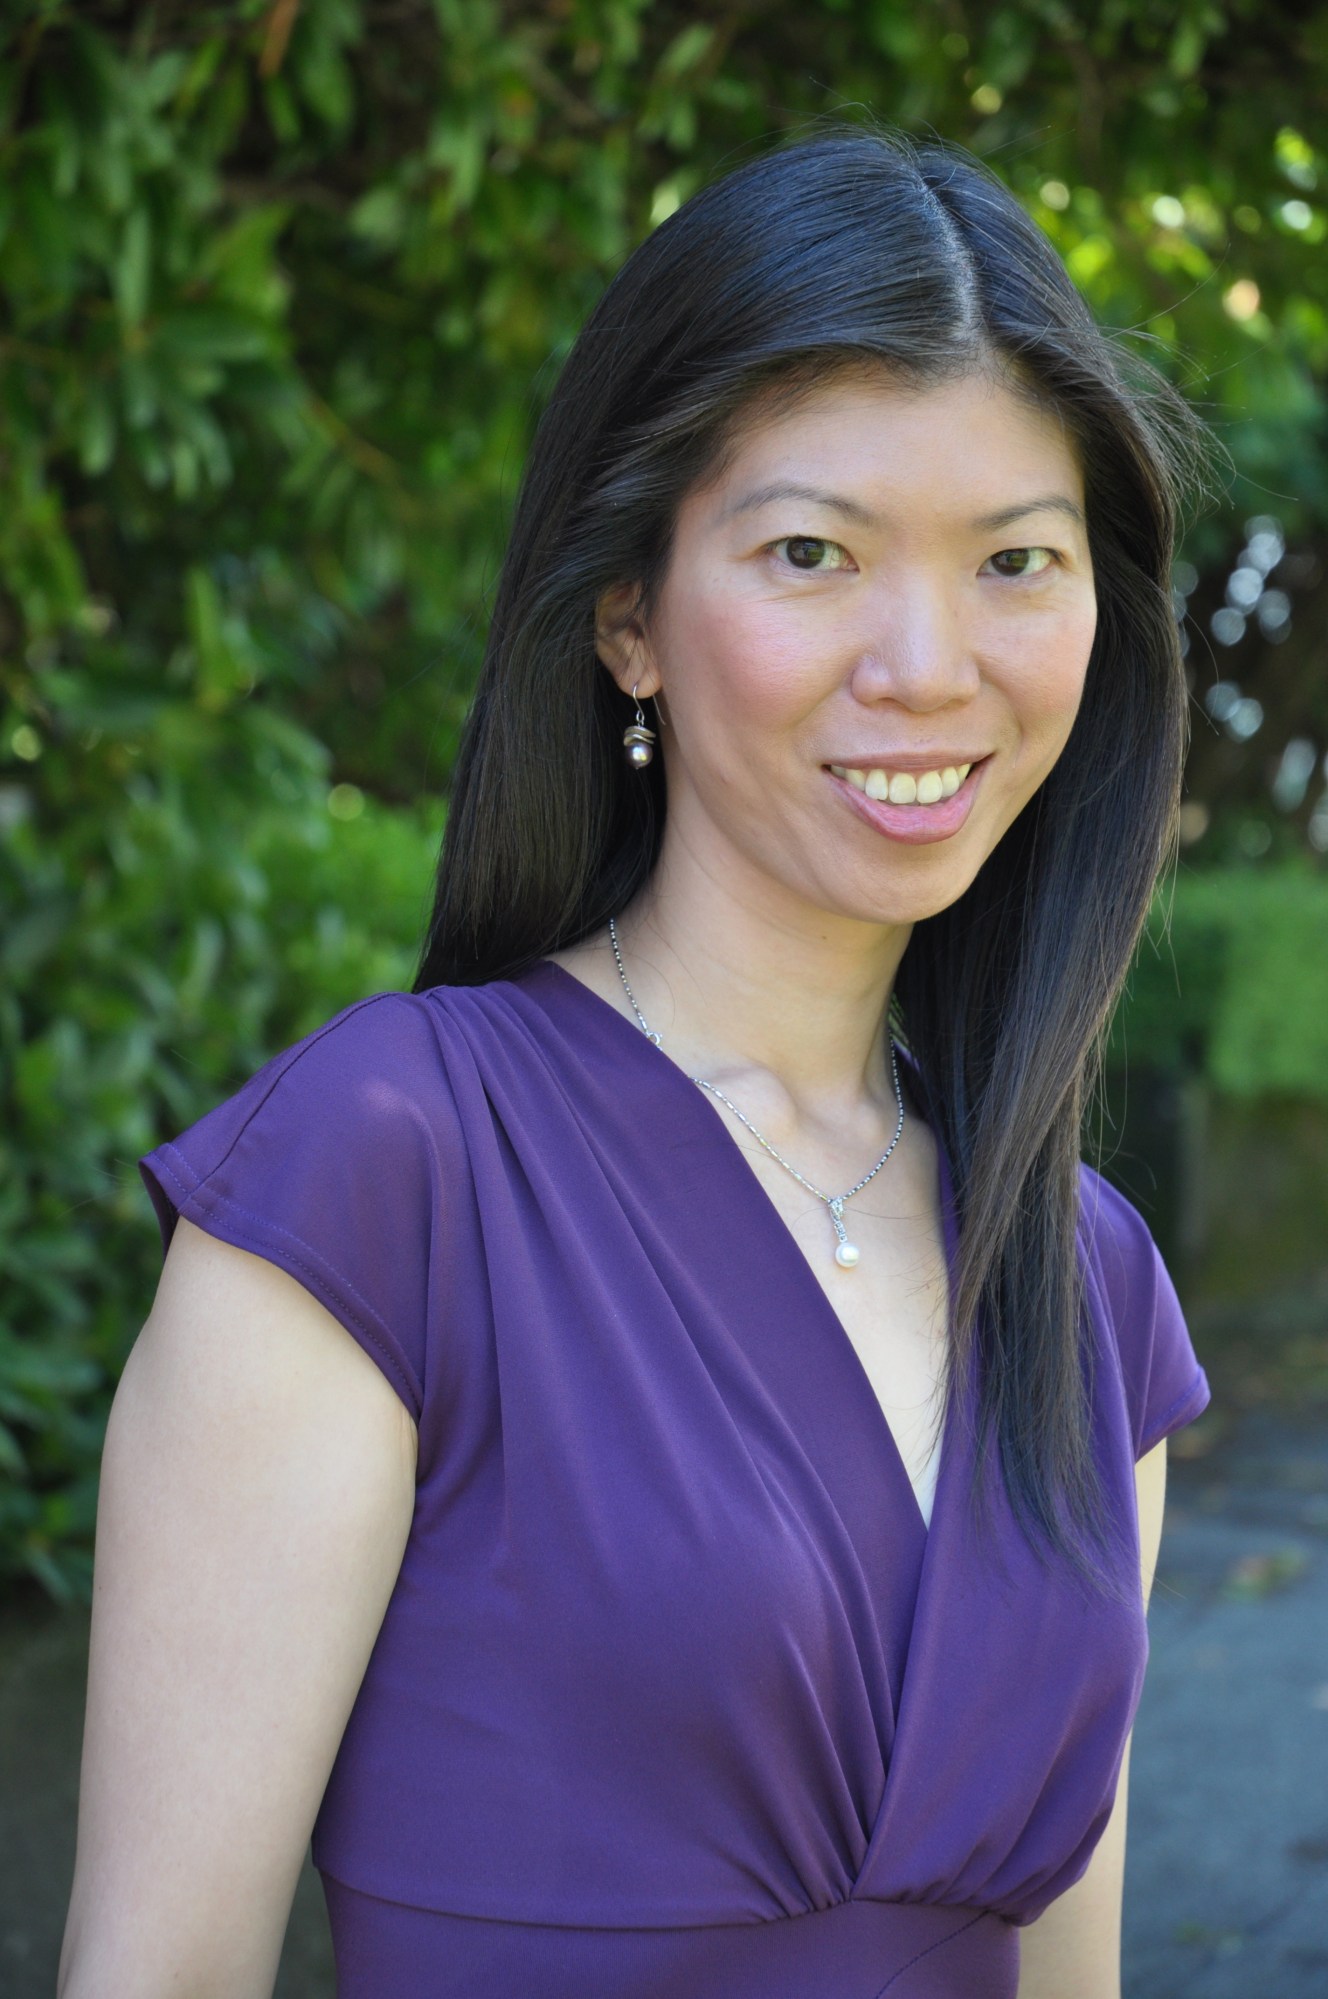 Anita Ho, associate professor in bioethics and health services research at University of British Columbia and The University of California, San Francisco